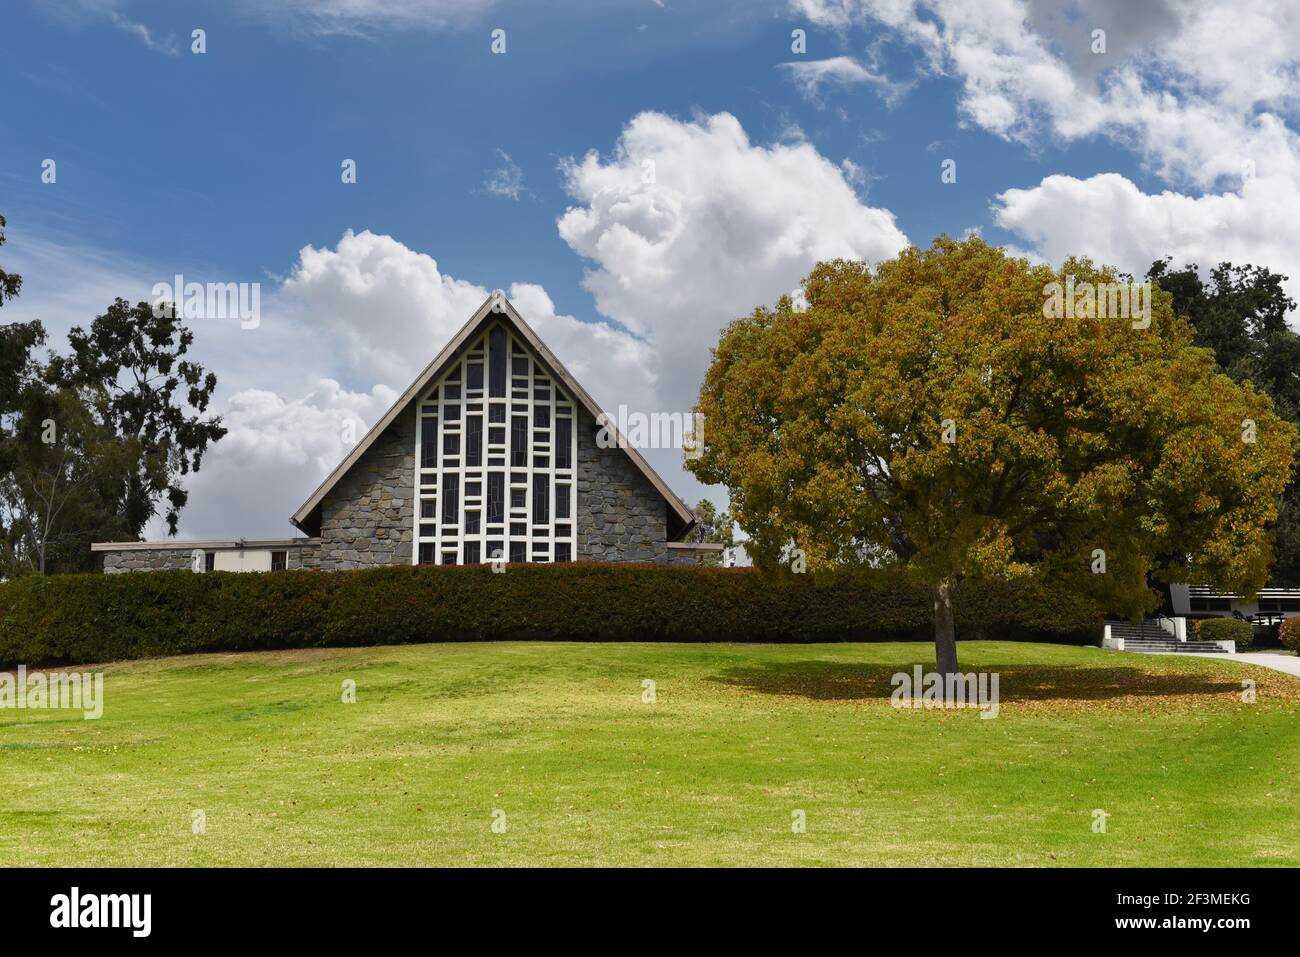 WHITTIER, CALIFORNIA 12 MAR 2021: Memorial Chapel on the Campus of Whittier College. Stock Photo